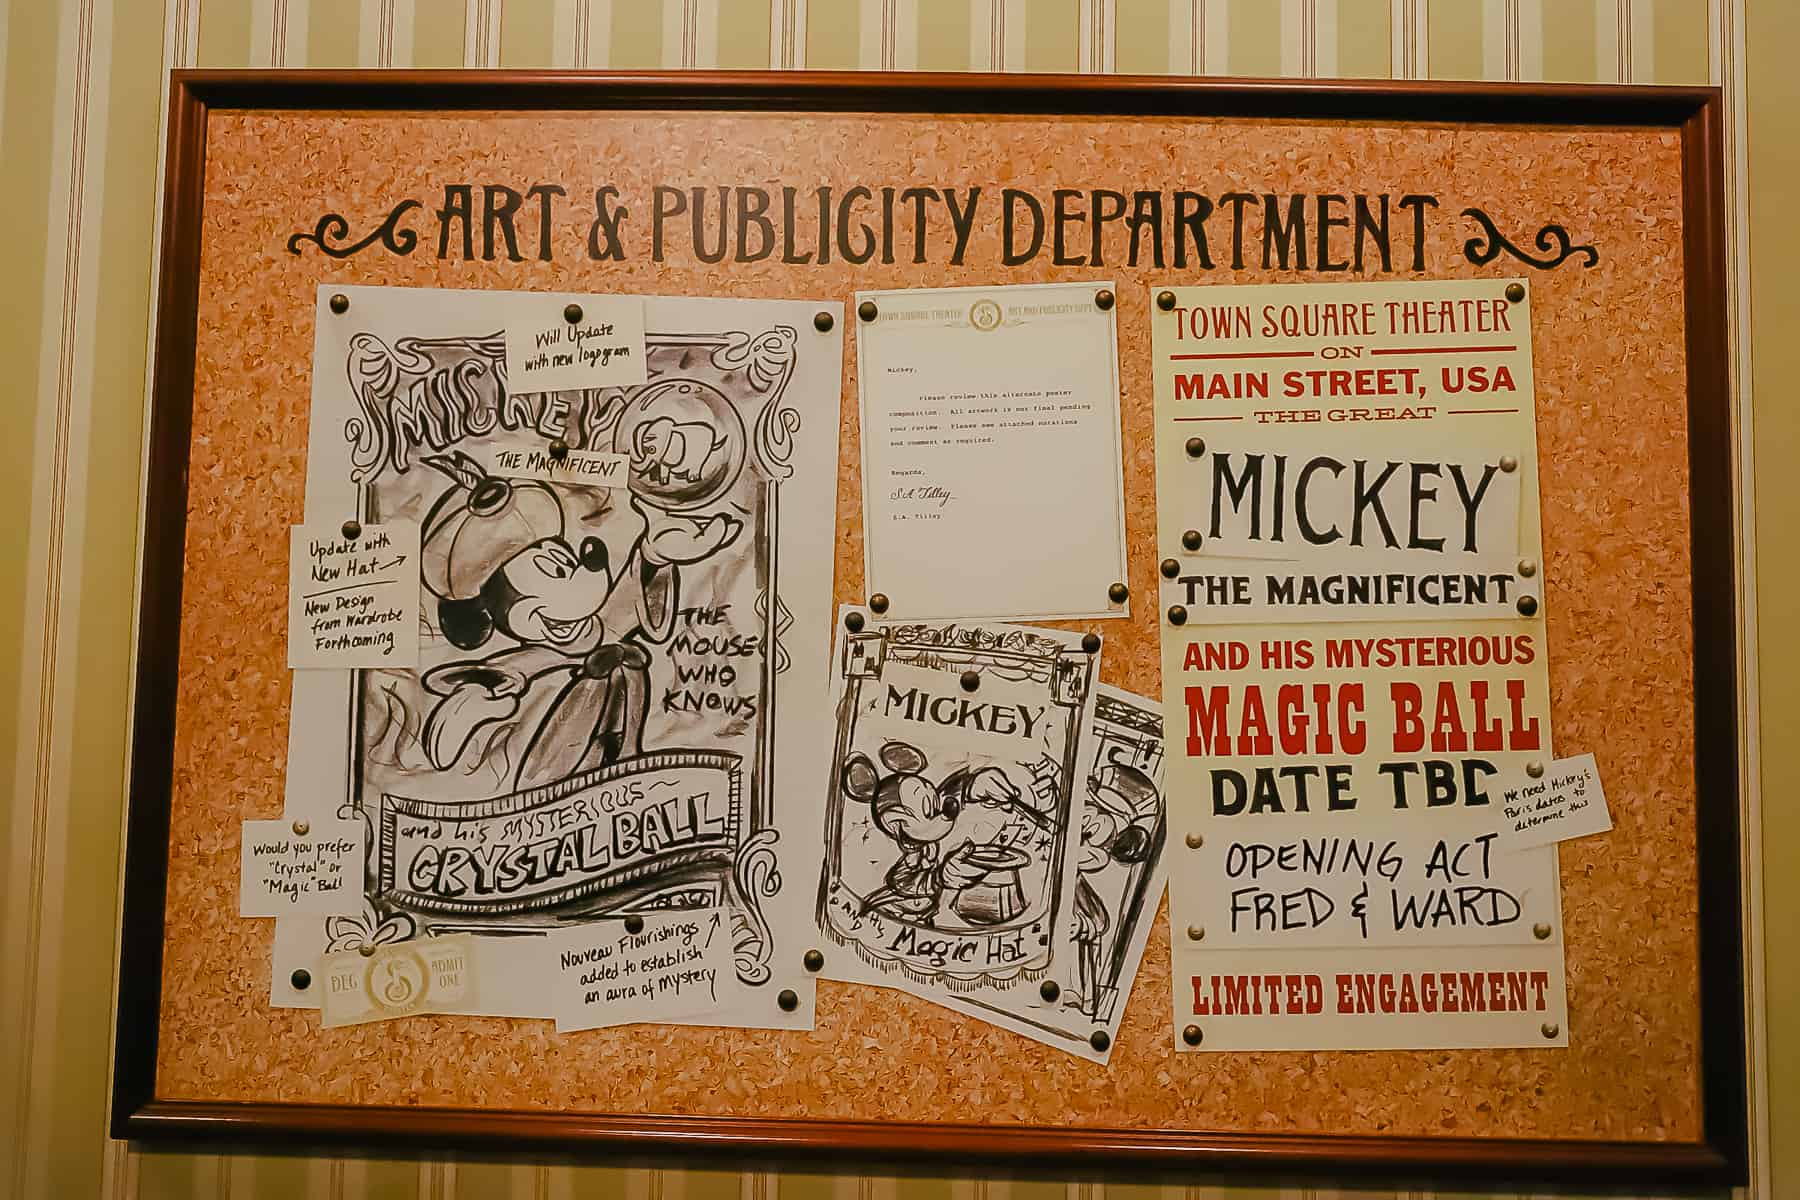 A queue prop that shows sketches of Micke and play bills. 